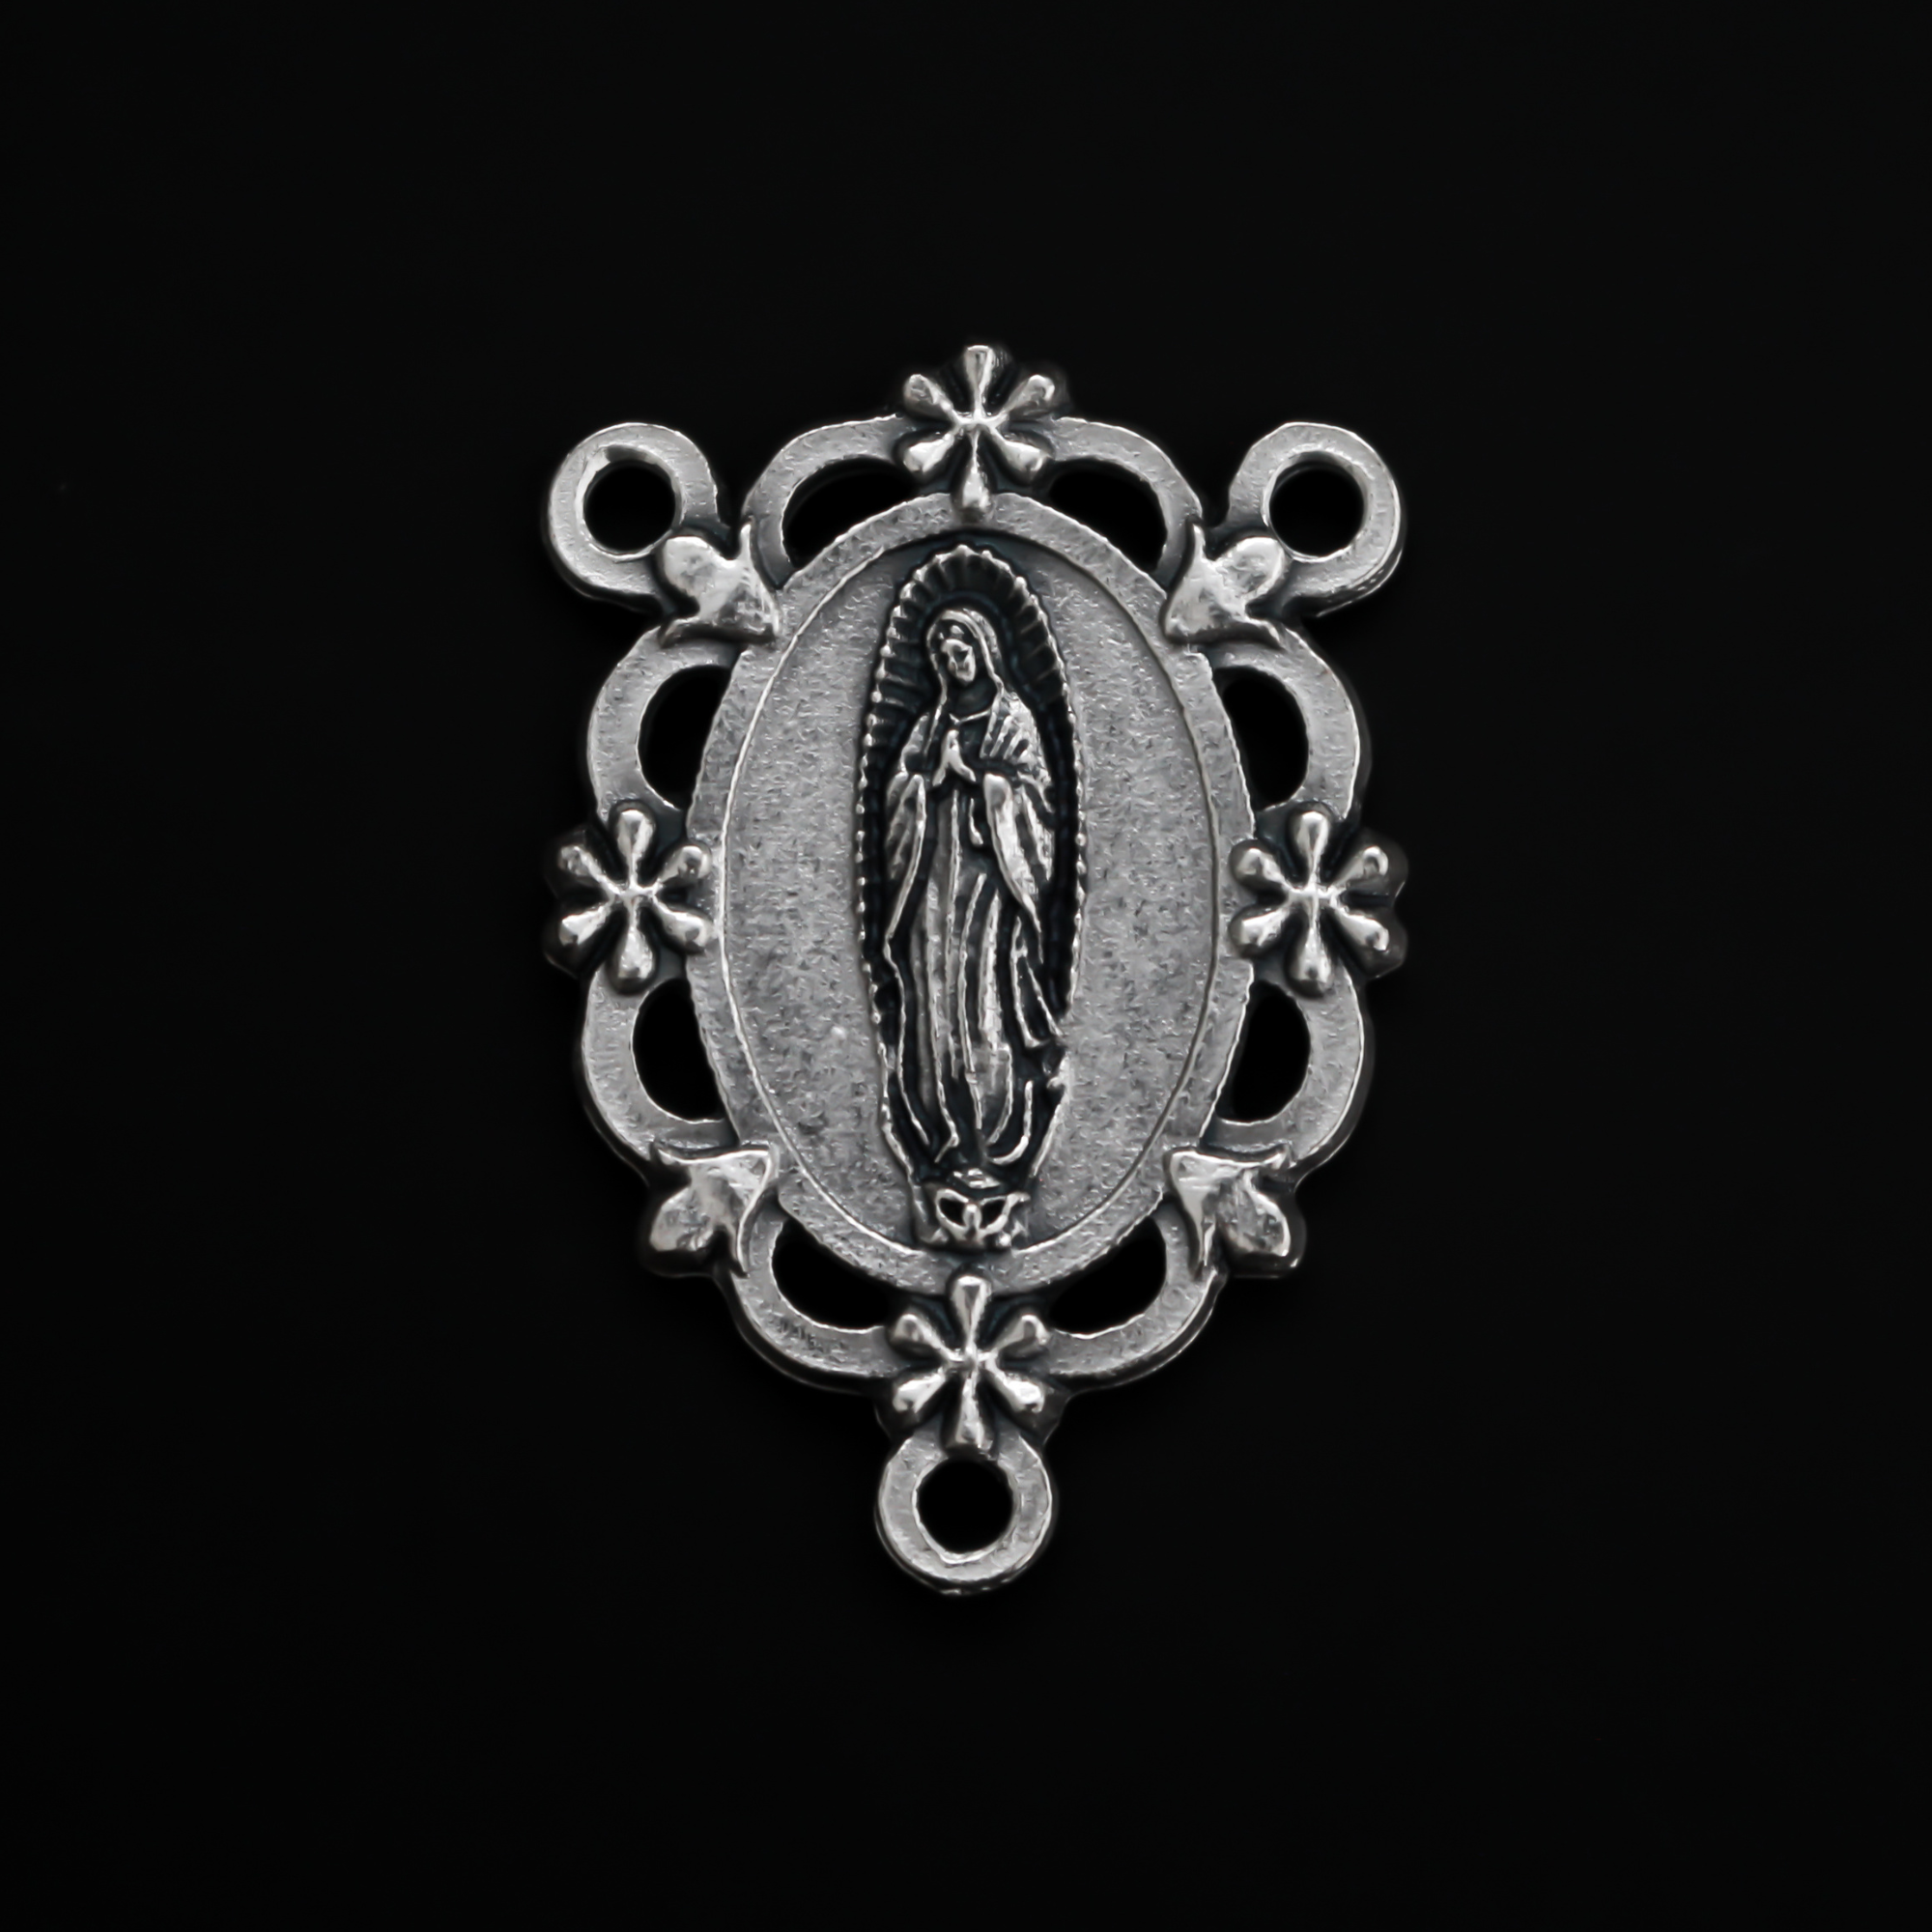 Our Lady of Guadalupe rosary centerpiece with filigree cut out design and floral detailing